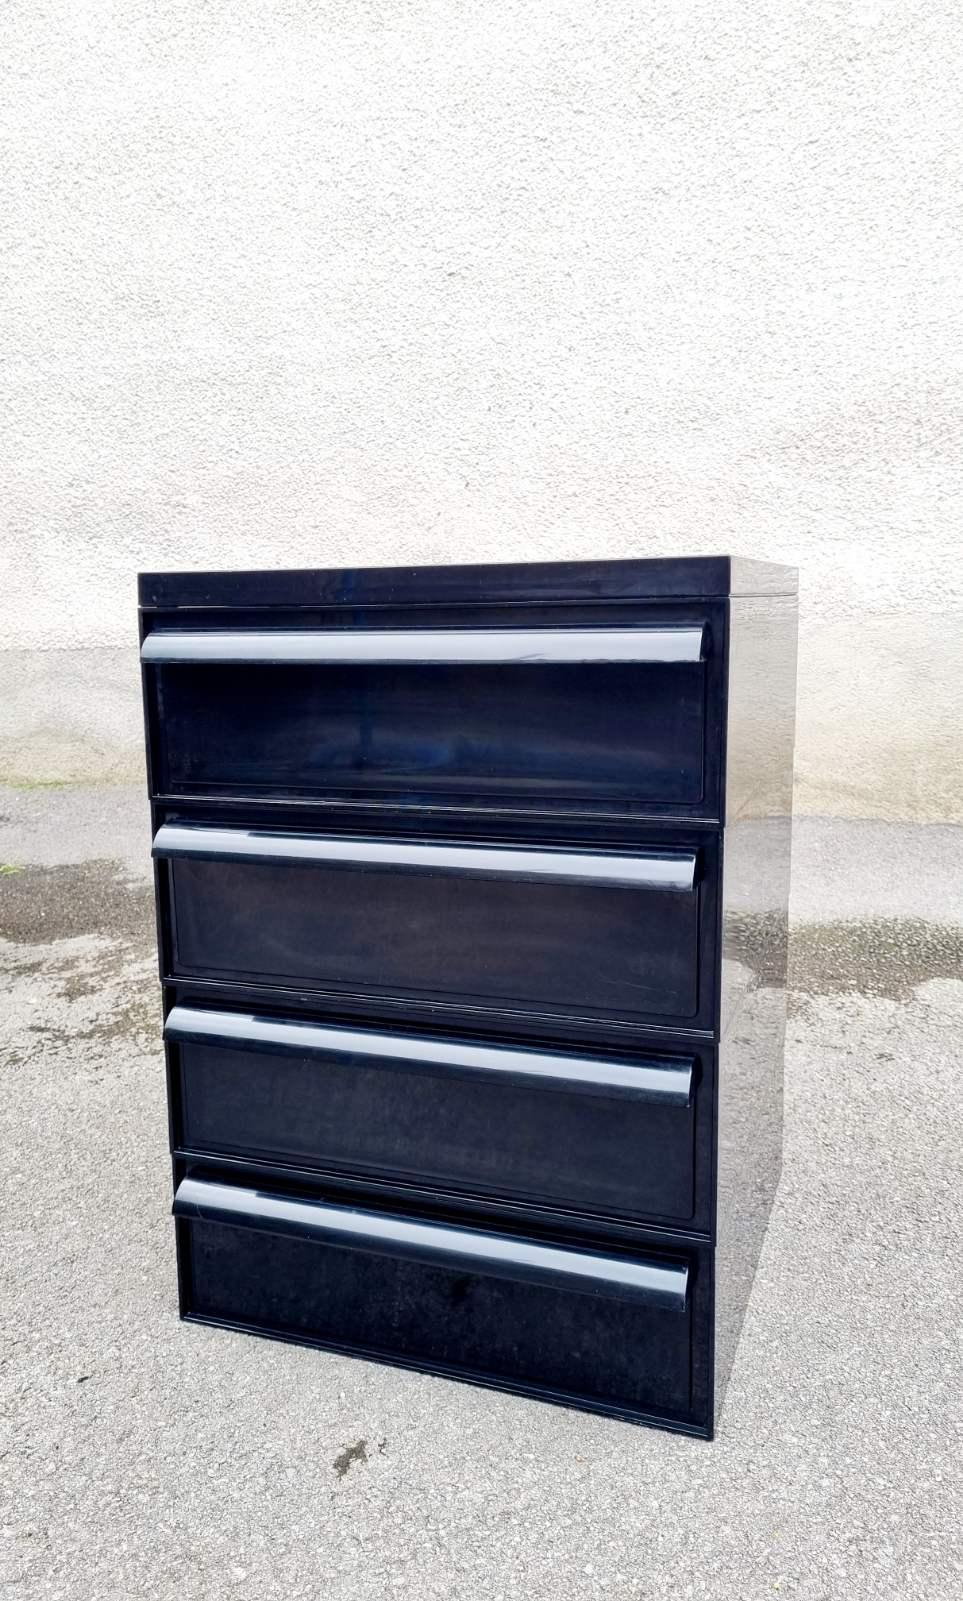 Nice black chest of drawers designed by Simon Fussell for Kartell Italy
This is model 4601 3-5
In very good conditions